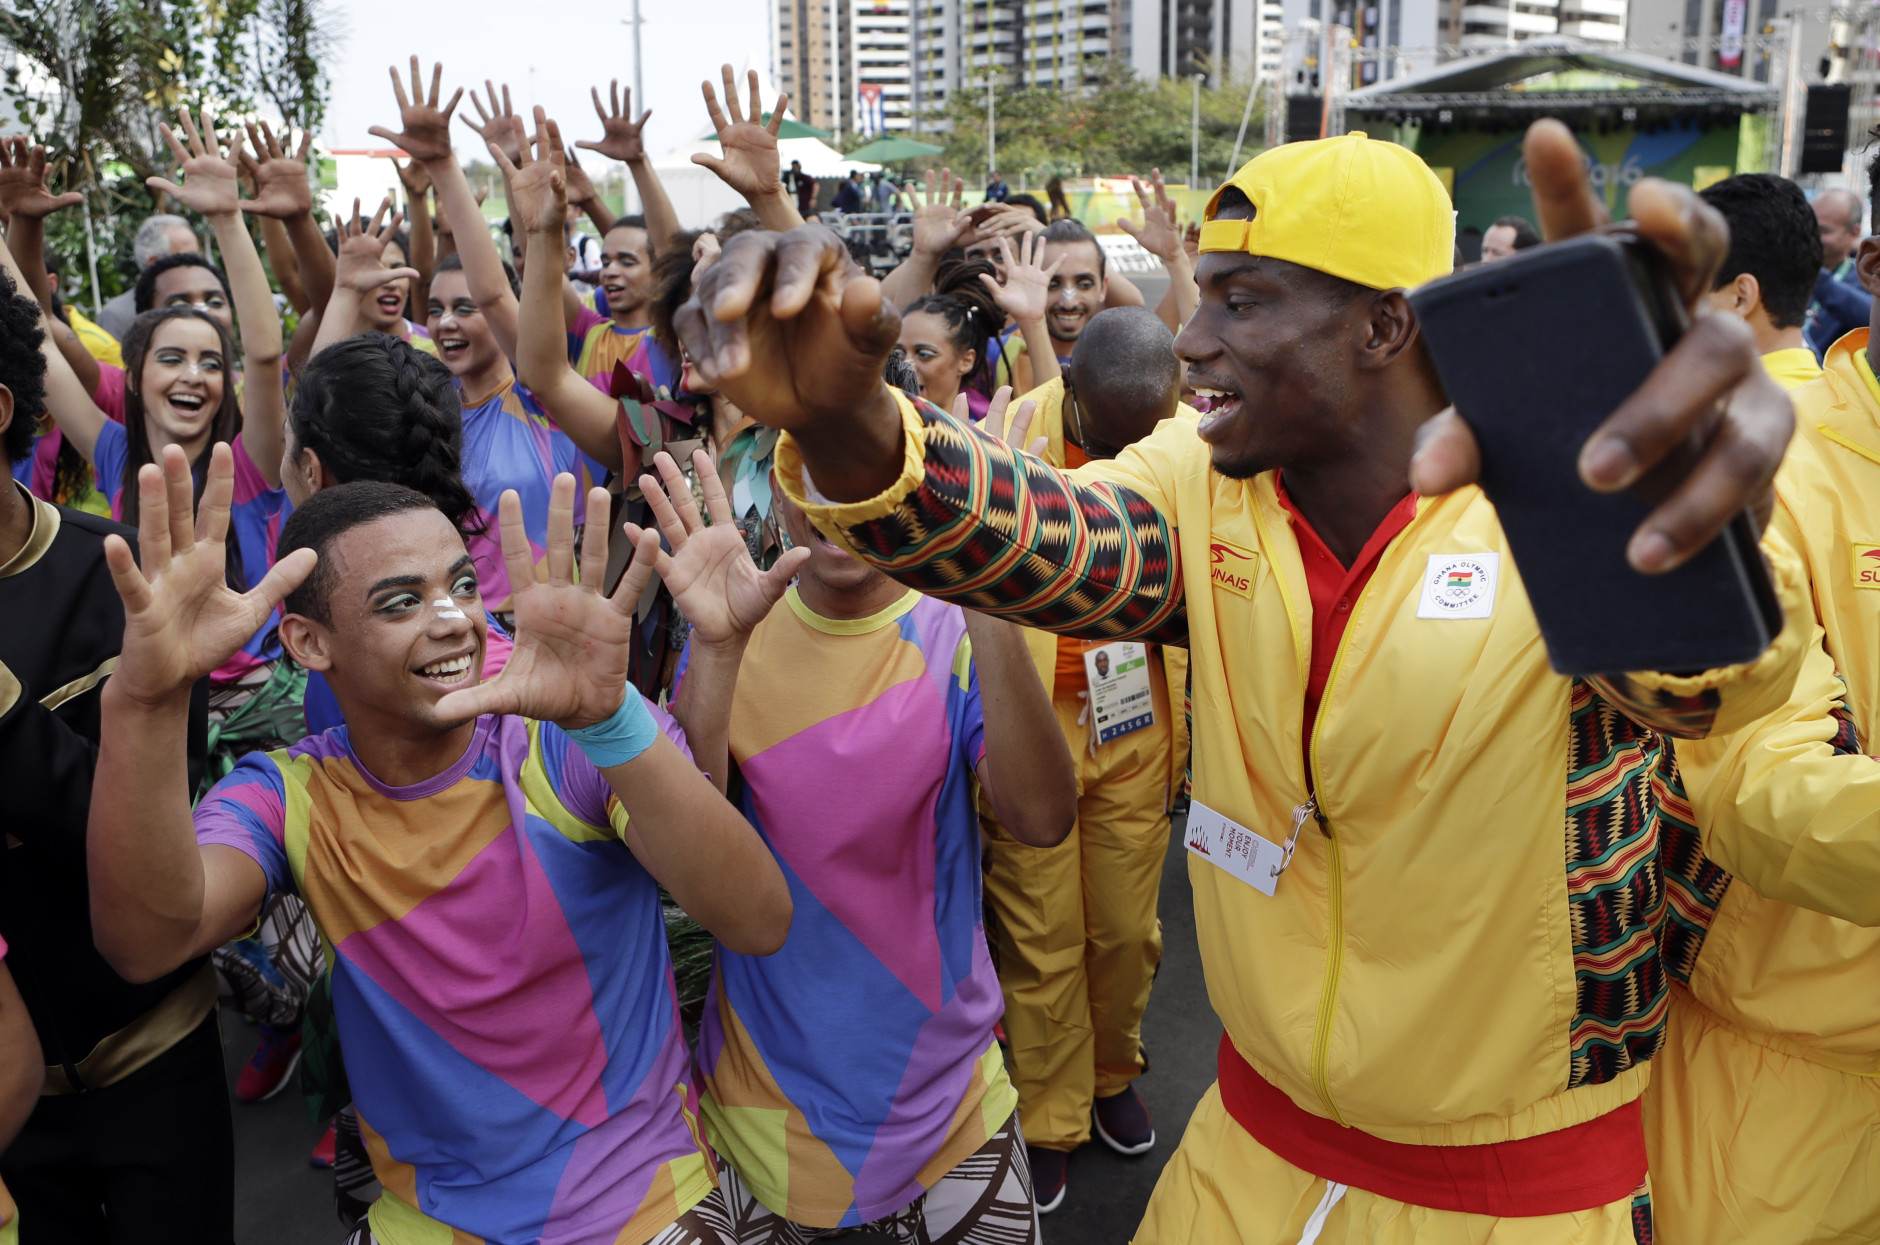 An athlete from Ghana dances with Brazilian performers at a welcoming ceremony at the 2016 Summer Olympics in Rio de Janeiro, Brazil, Wednesday, Aug. 3, 2016. (AP Photo/Robert F. Bukaty)